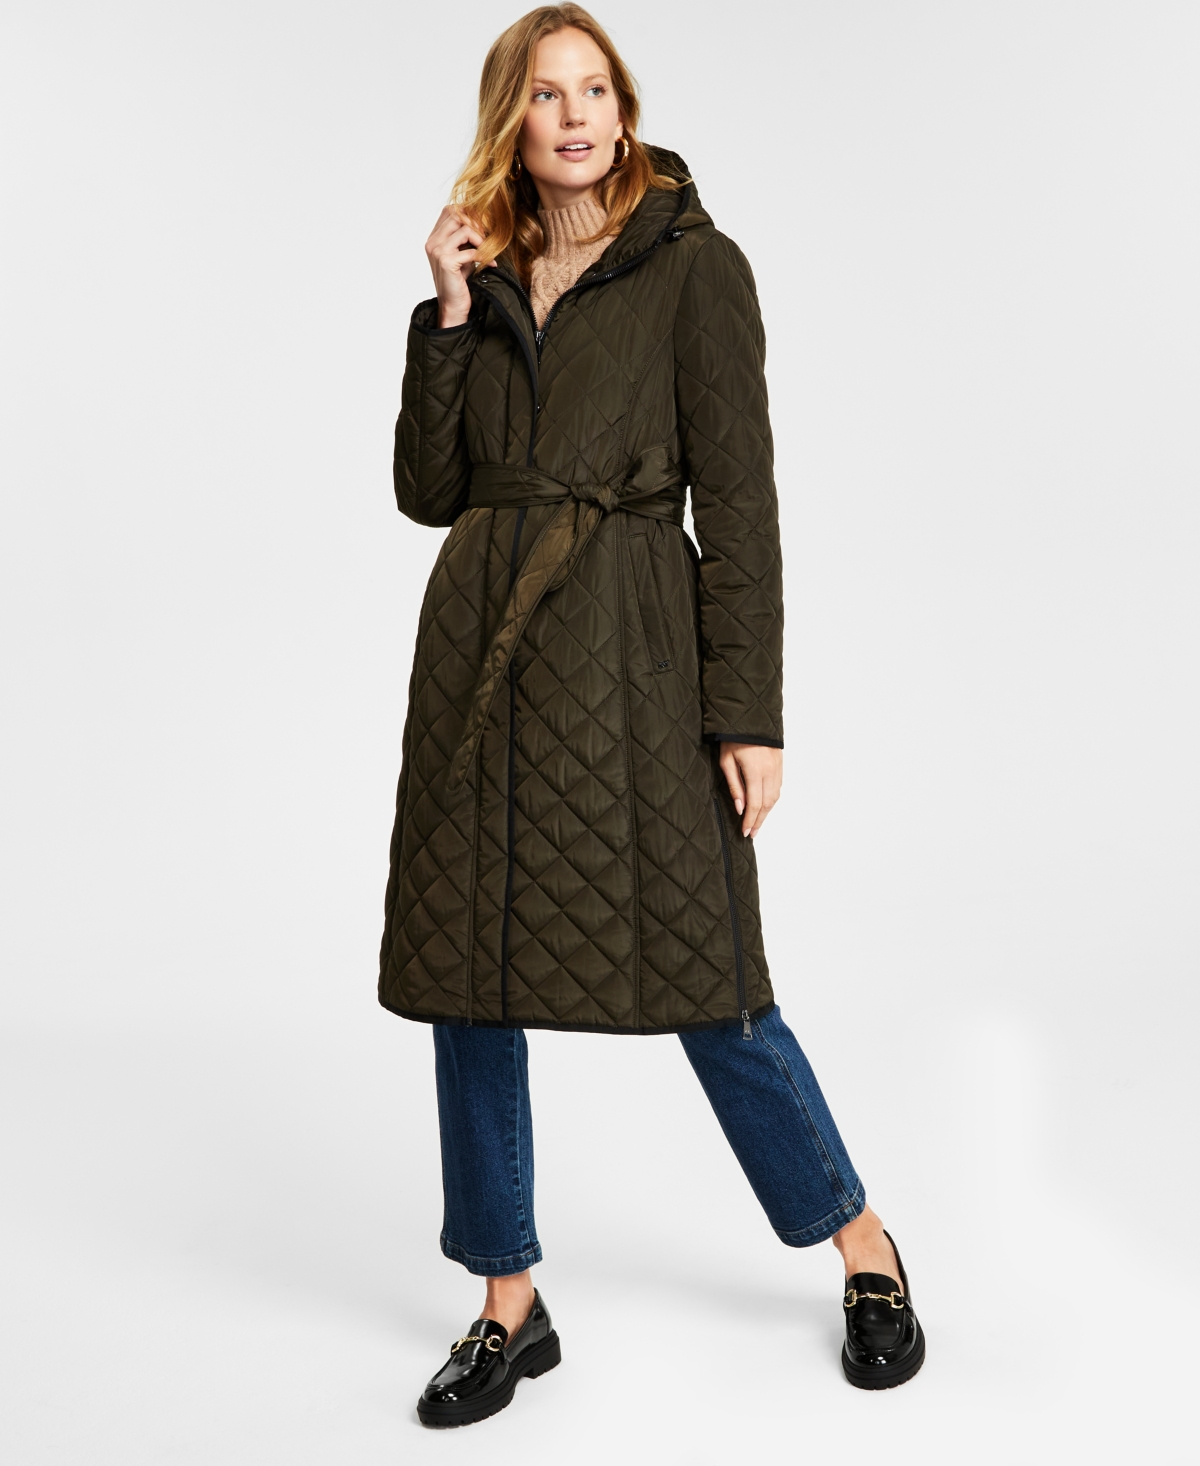 Dkny Women's Hooded Belted Quilted Coat In Loden